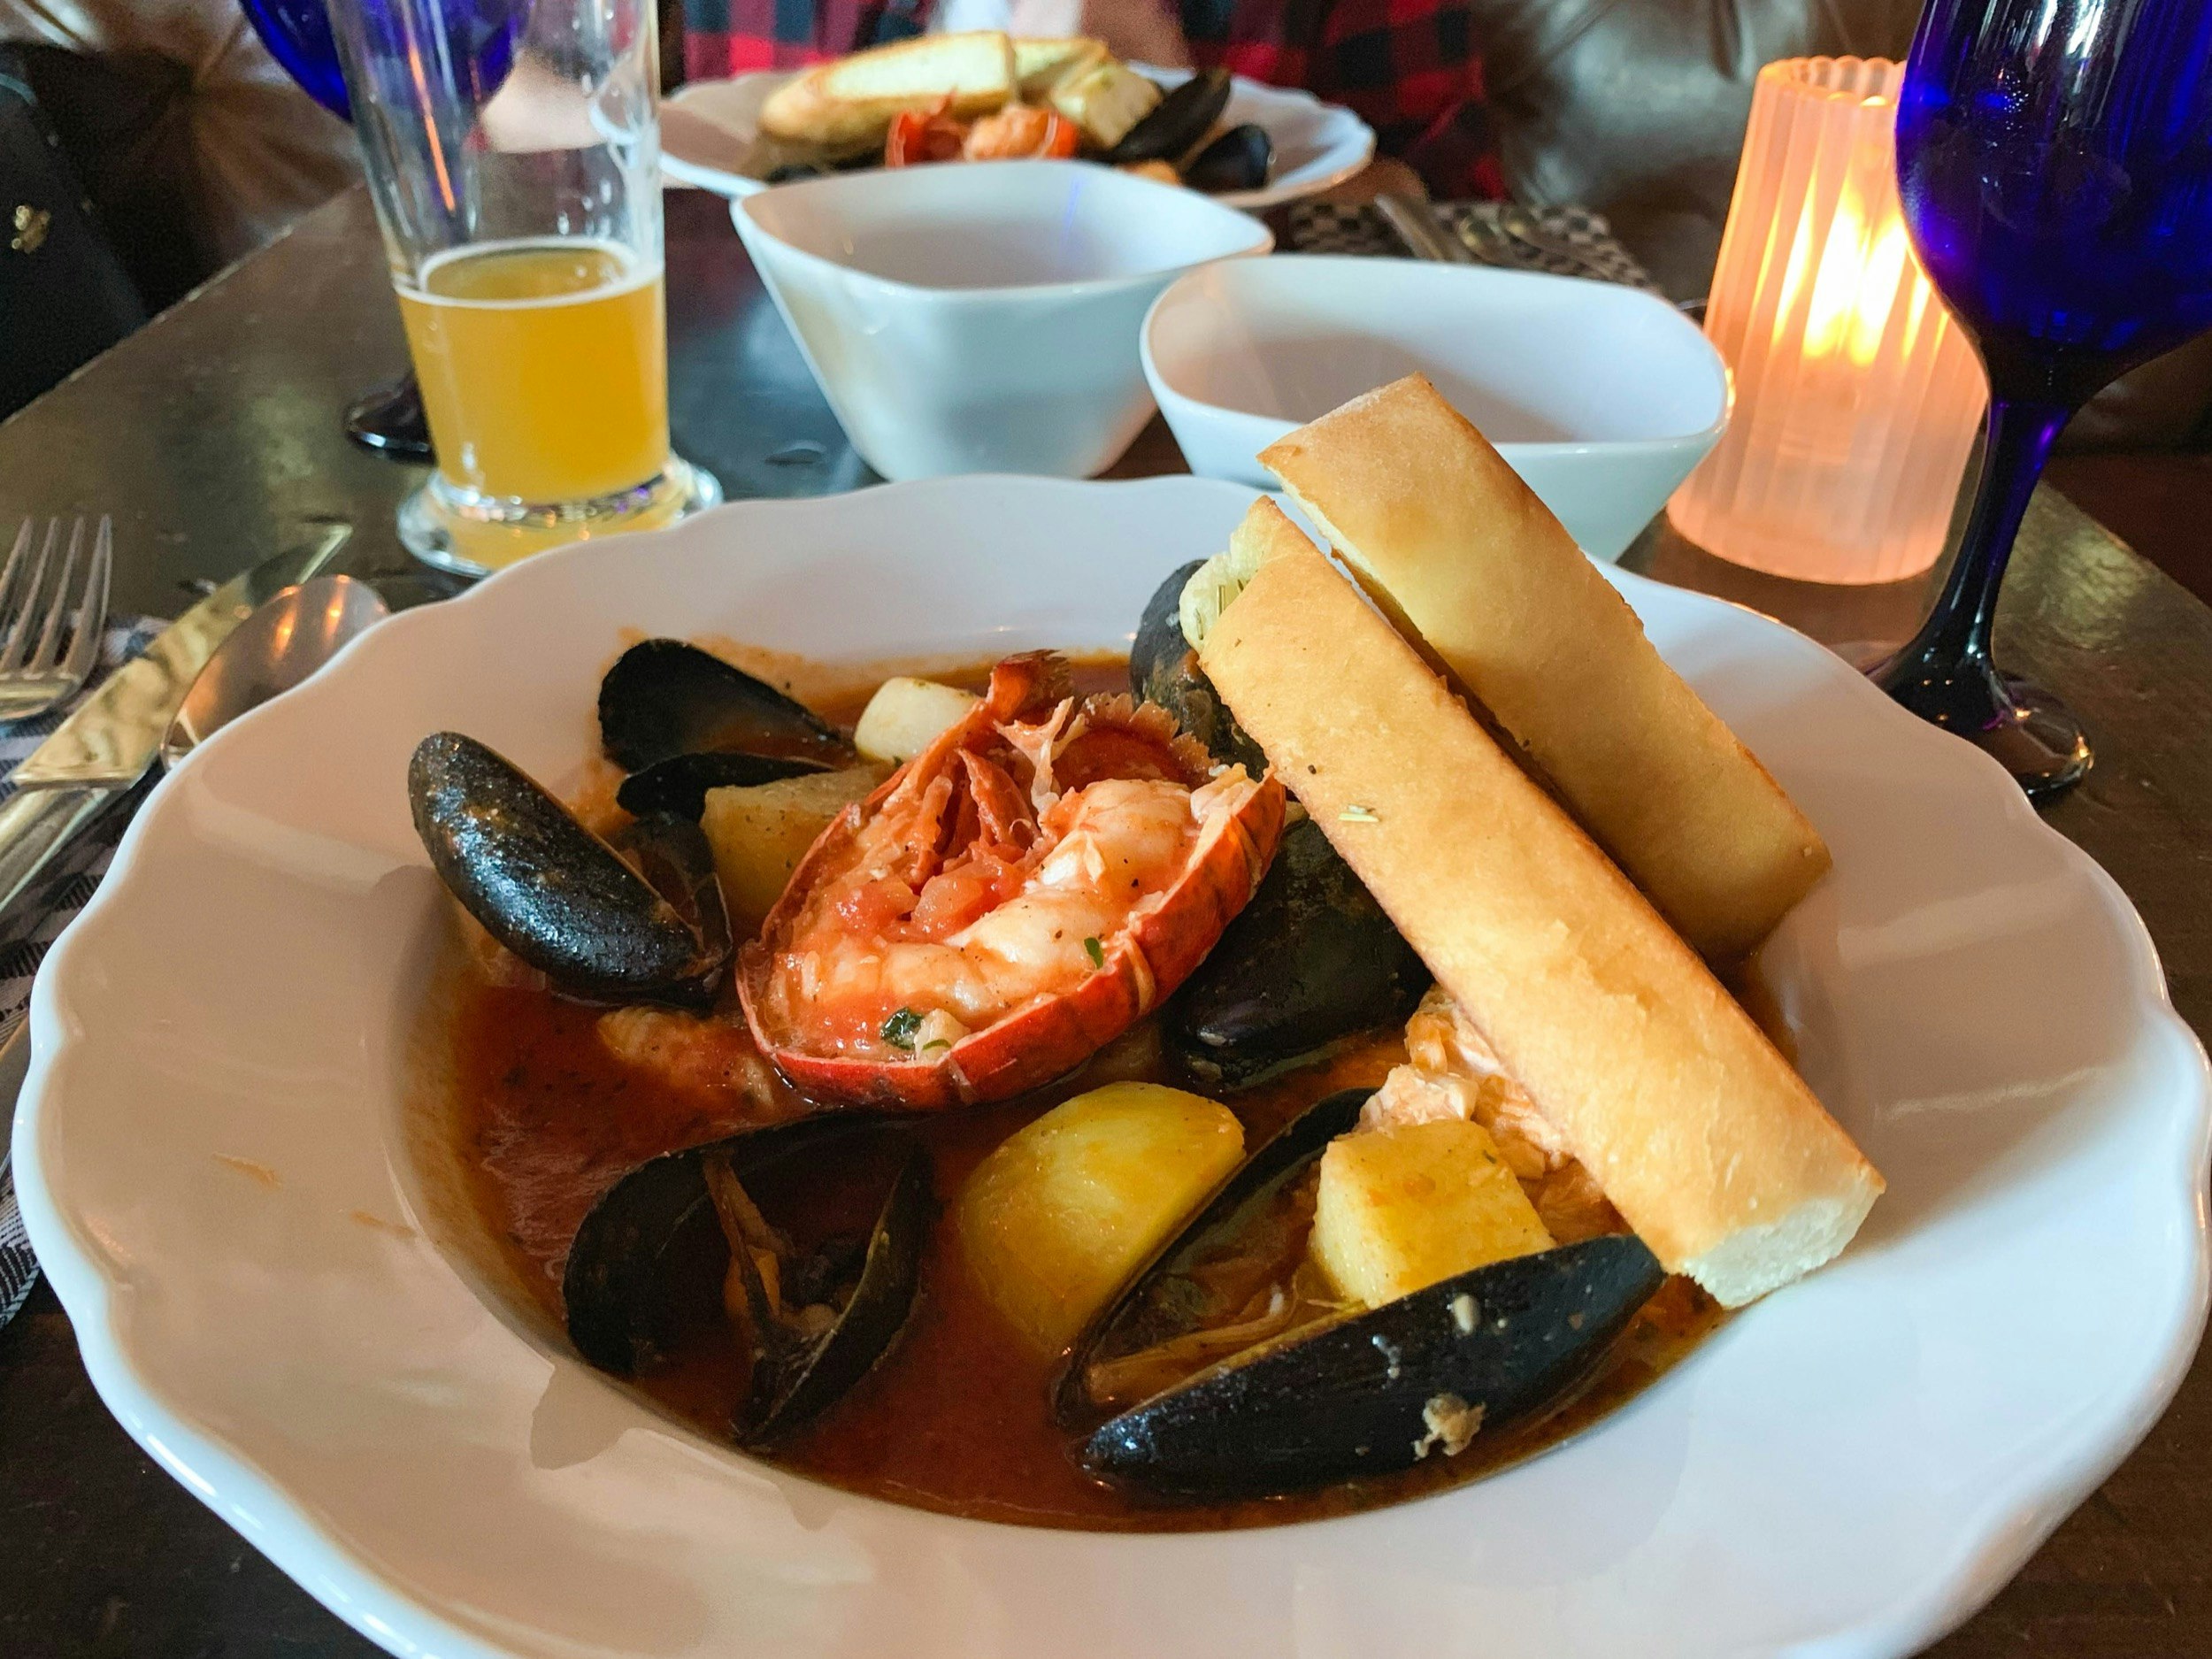 A plate of seafood stew with clams and other ingredients is seen at The Bicycle Thief in Halifax, Nova Scotia